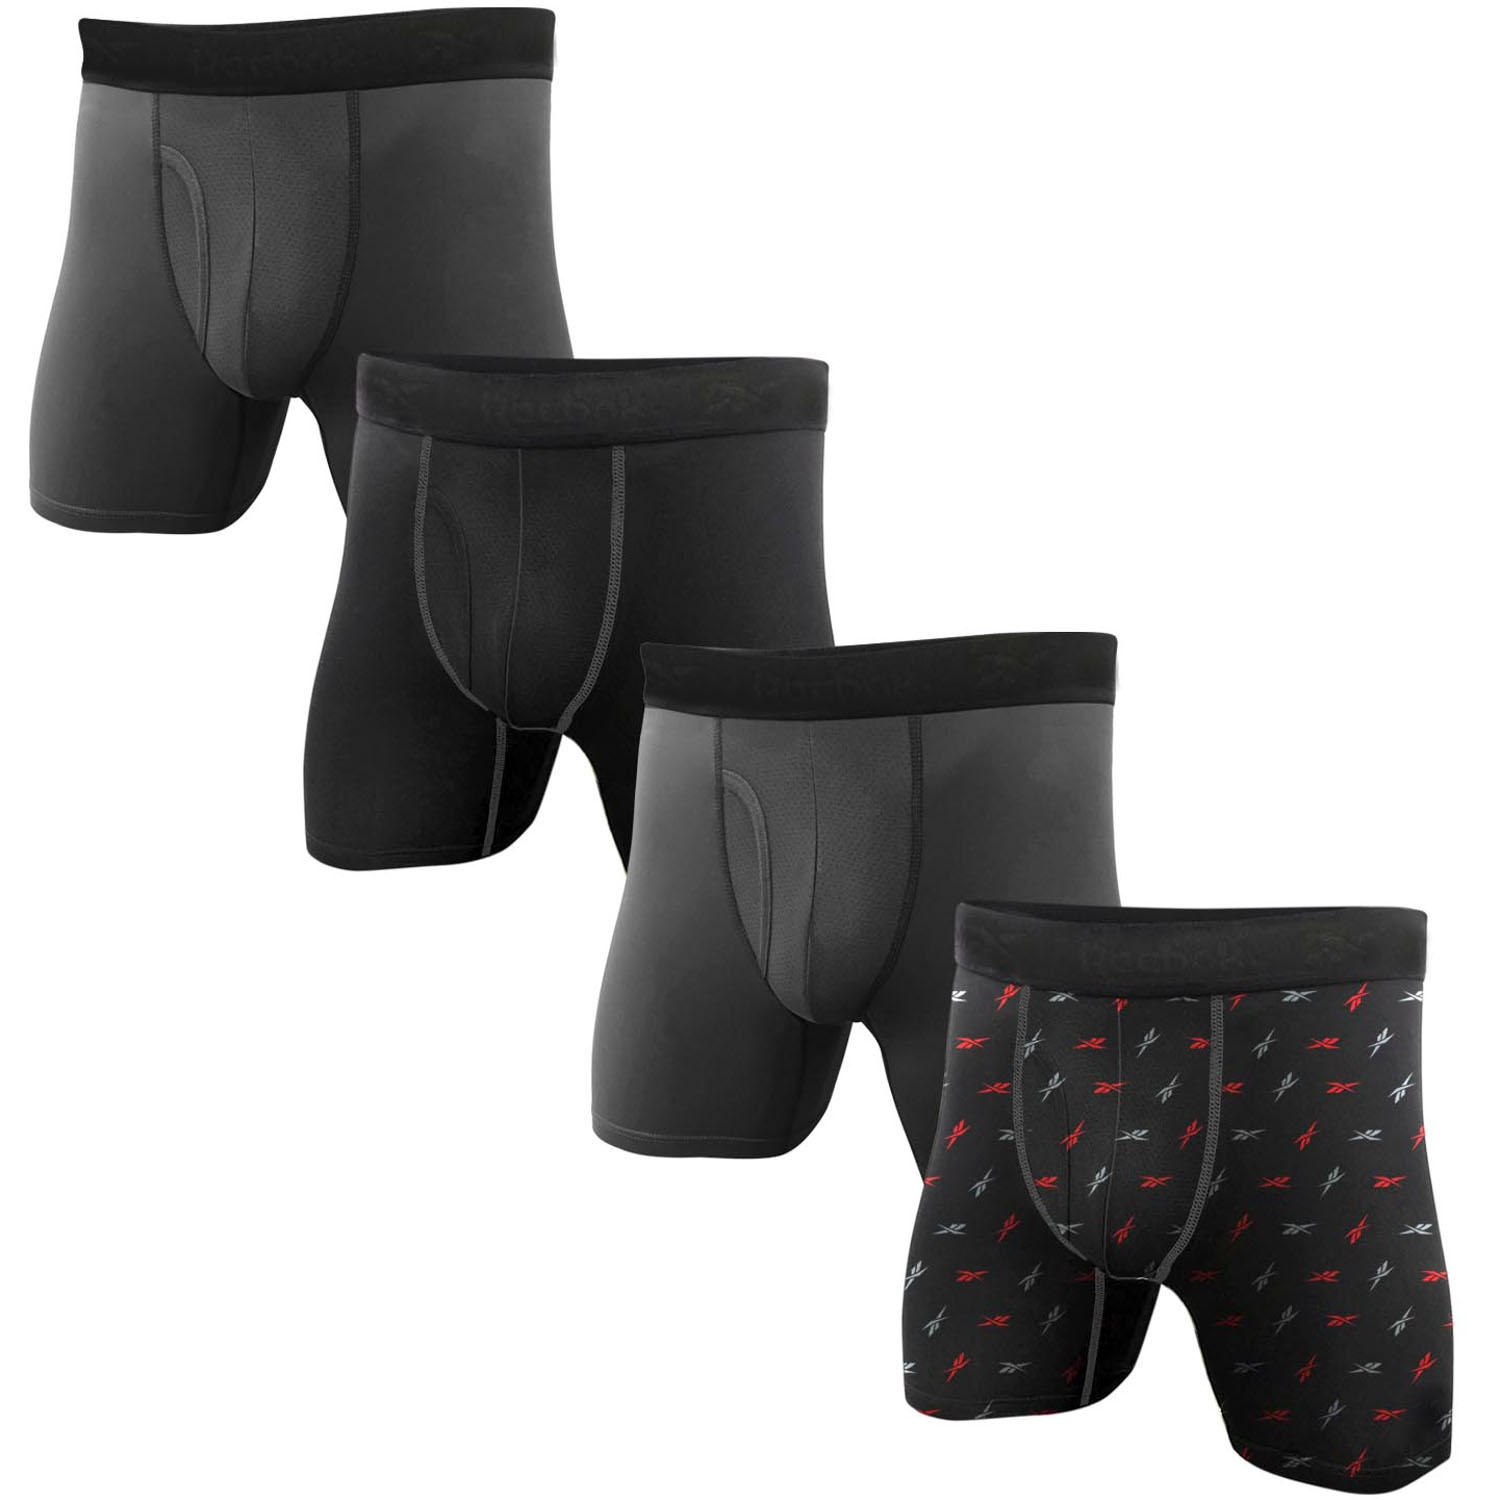 Sam's Club Members : Reebok Men's 4-Pack Performance Boxer Brief, $10.98, free shipping for PLUS